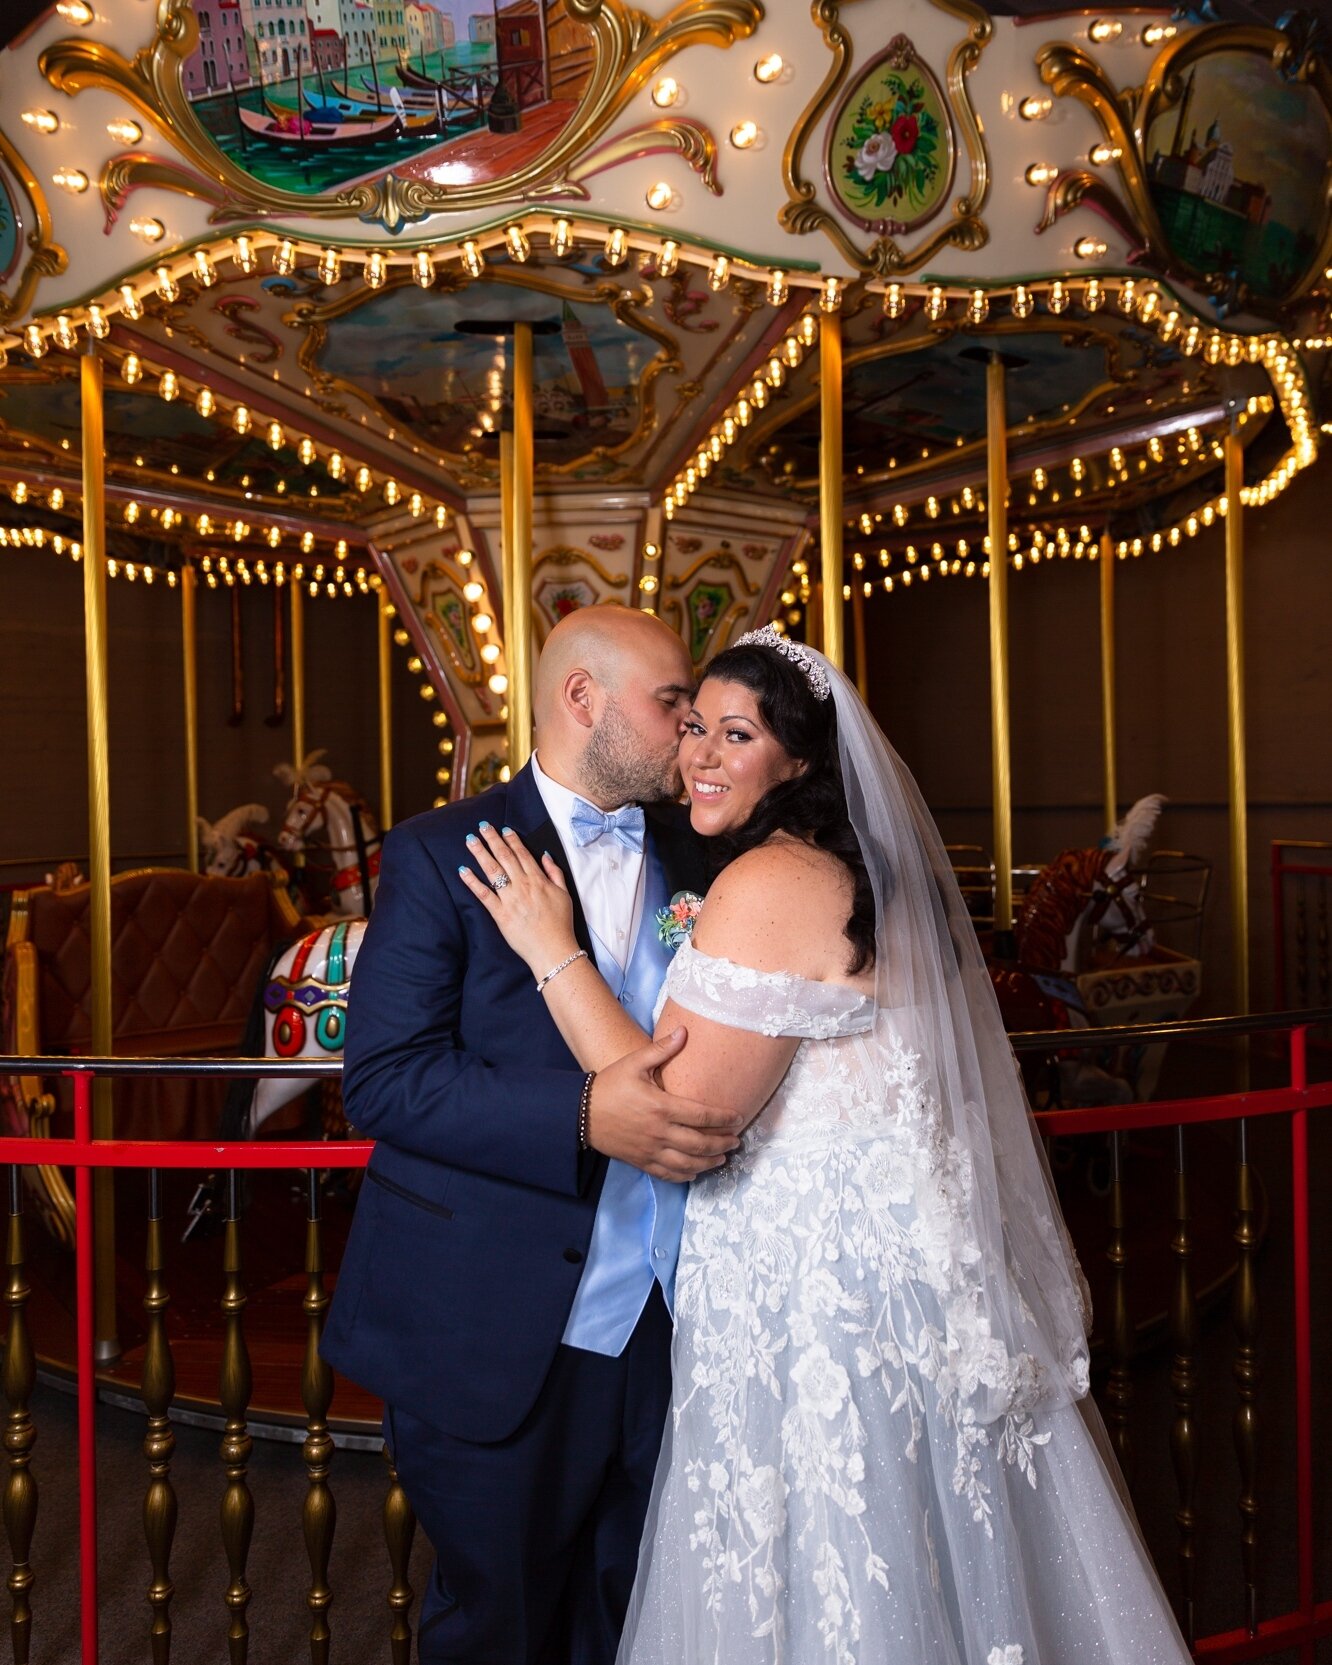 Happy first anniversary to this fun loving 🥰 Disney and carousel obsessed couple! We love 💕 watching our couples so happy and in love. They welcome a baby a few months ago. Help me share a warm congrats 🎉 by dropping an emoji for this couple 👏 
.